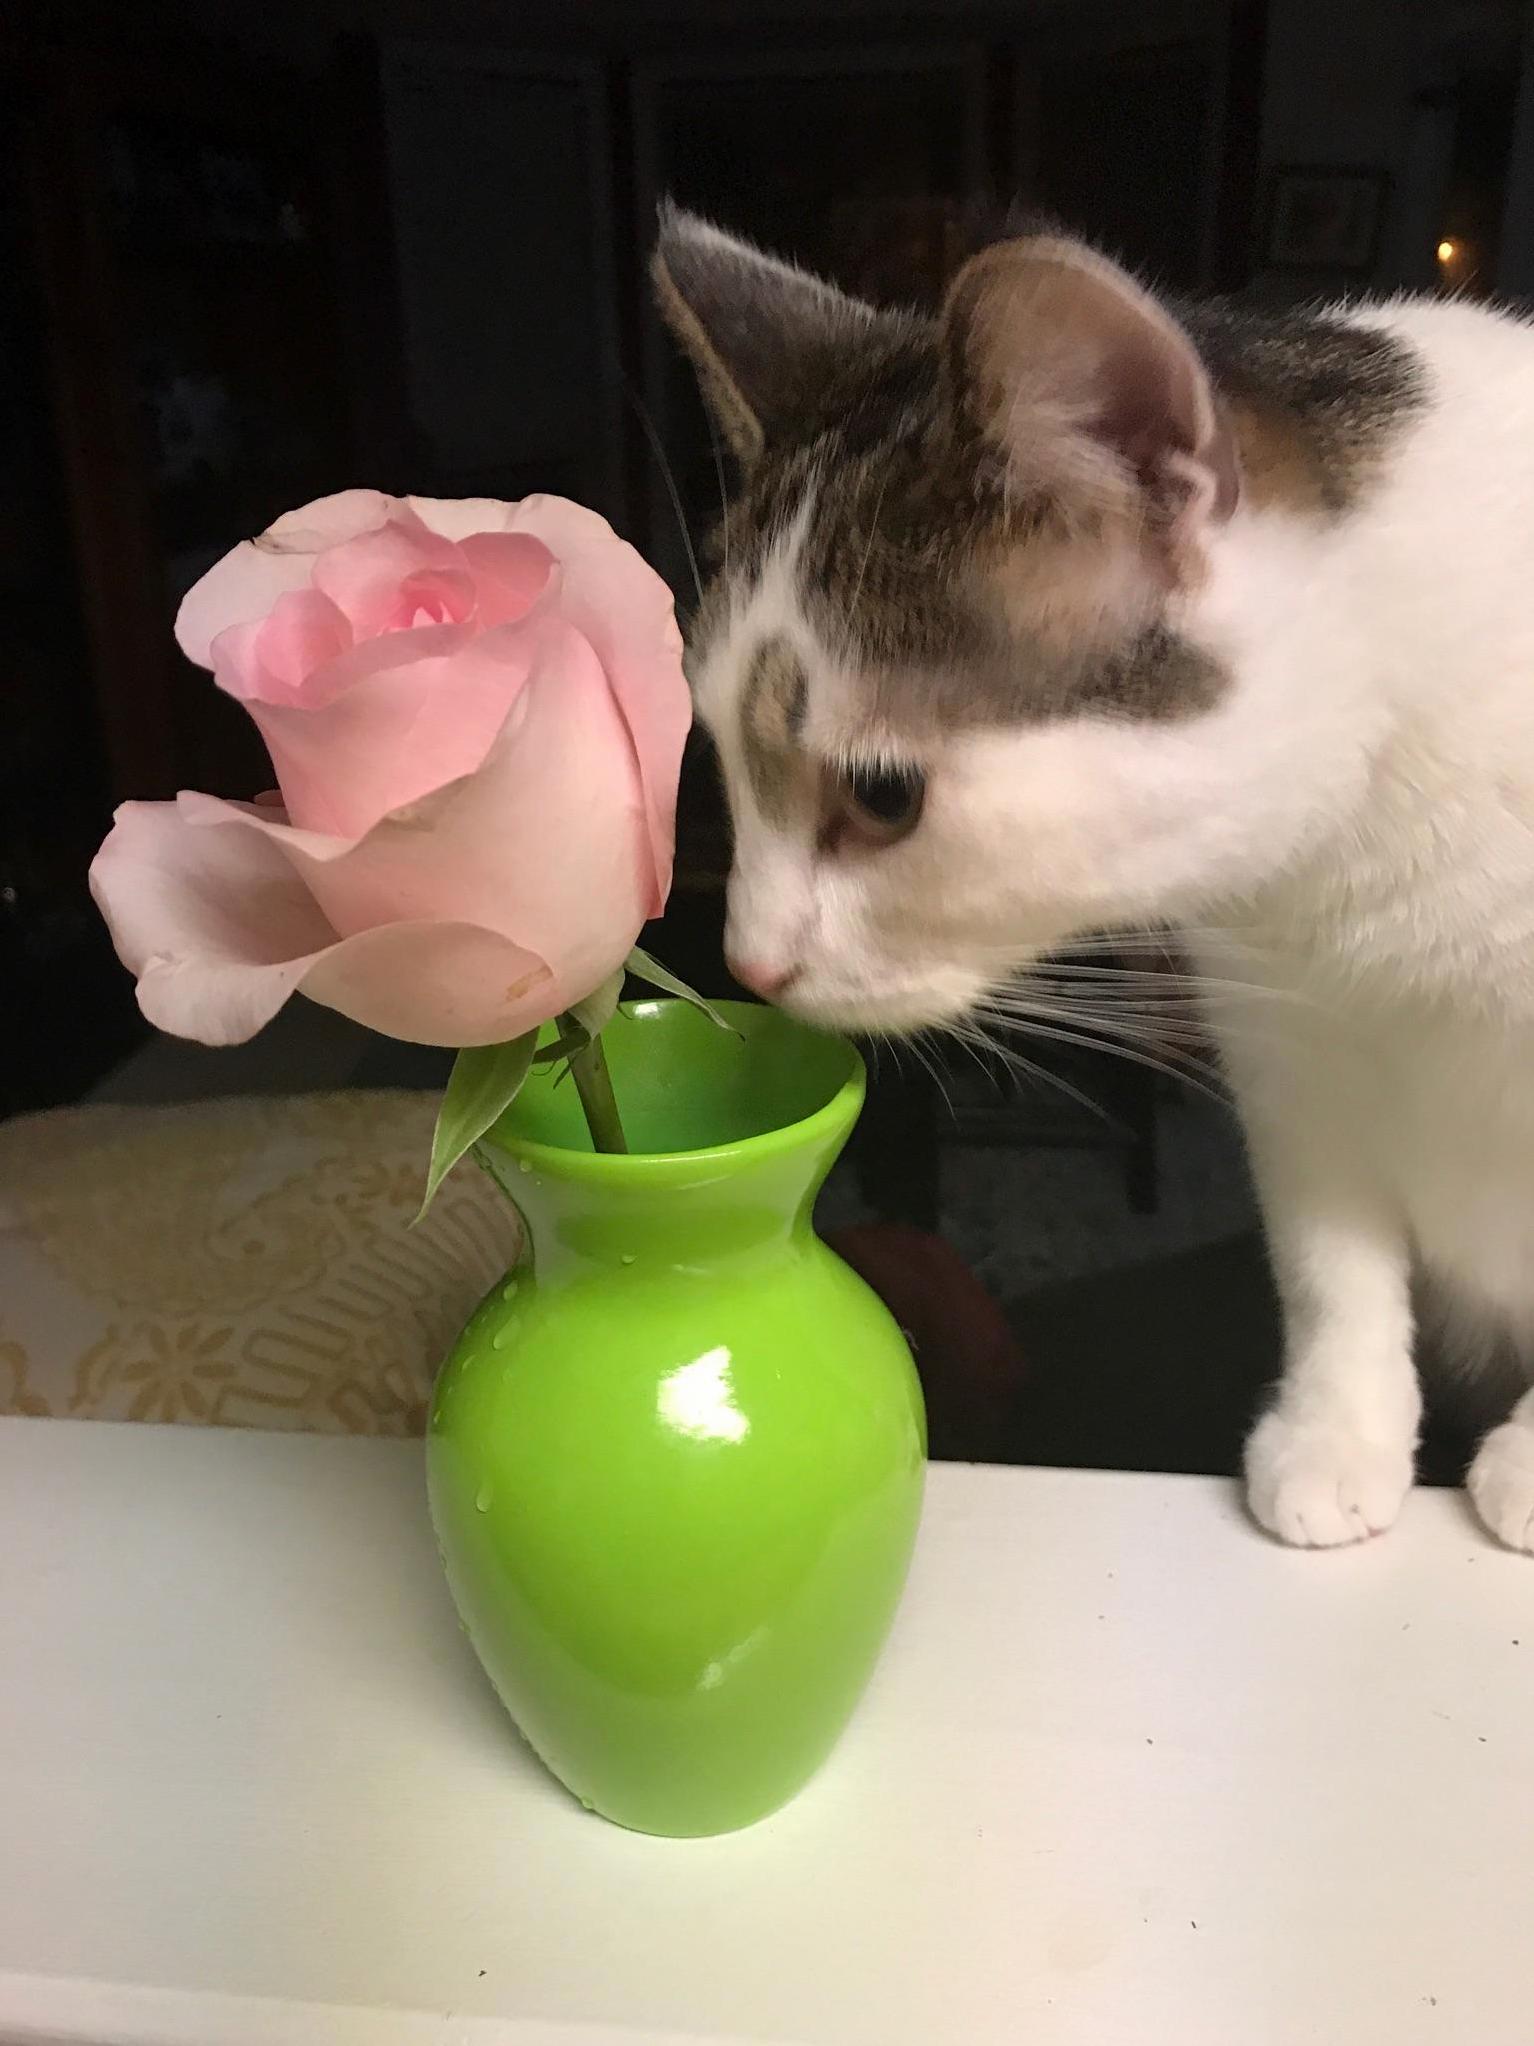 Banjo and the rose.